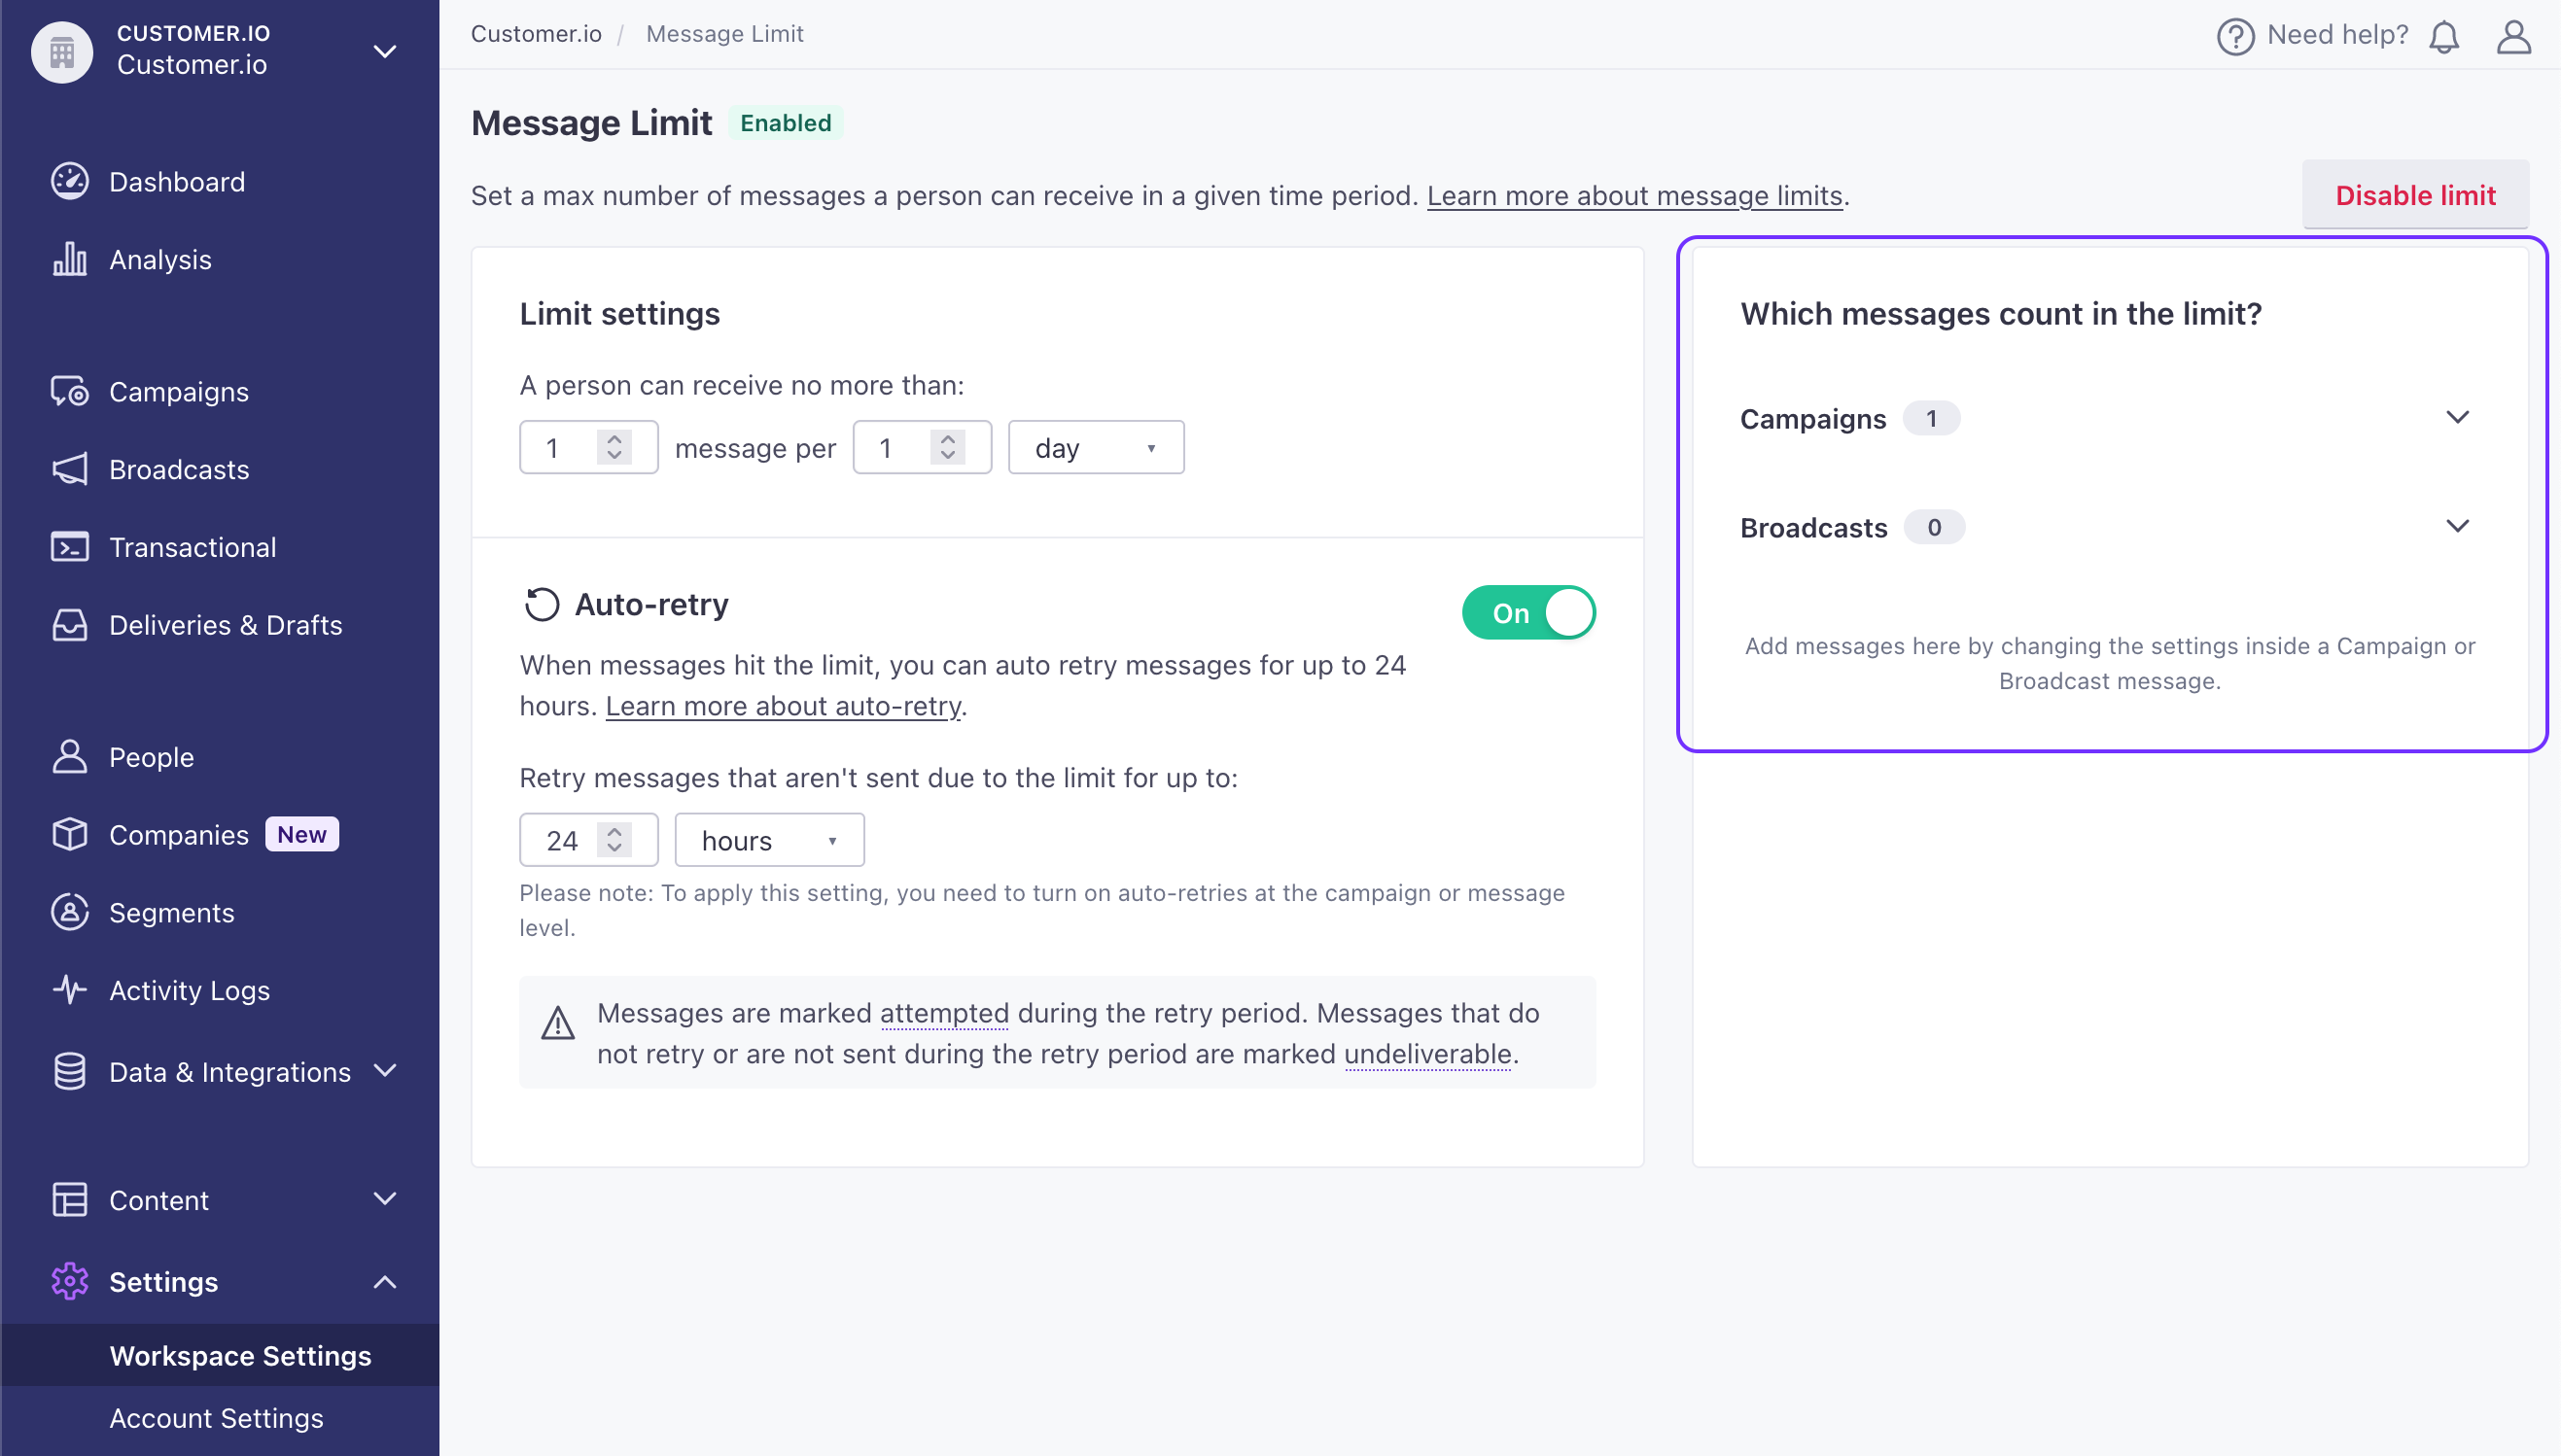 Find the count of campaigns and broadcasts that observe your message limit